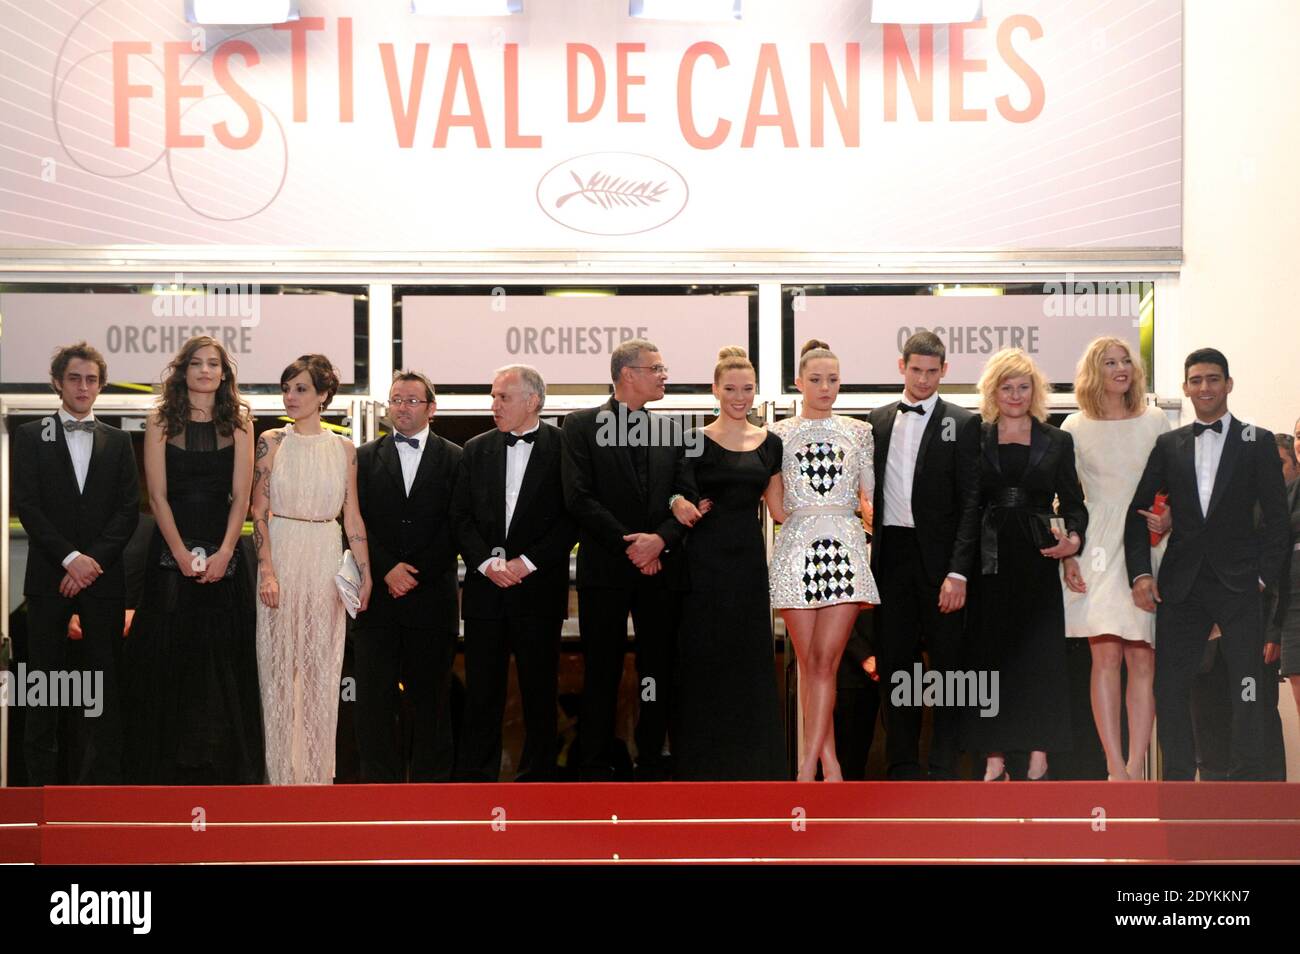 Adele Exarchopoulos, director Abdellatif Kechiche and Lea Seydoux arriving for La Vie D'Adele screening held at the Palais Des Festivals as part of the 66th Cannes Film Festival in Cannes, France on May 23, 2013. Photo by Aurore Marechal/ABACAPRESS.COM Stock Photo